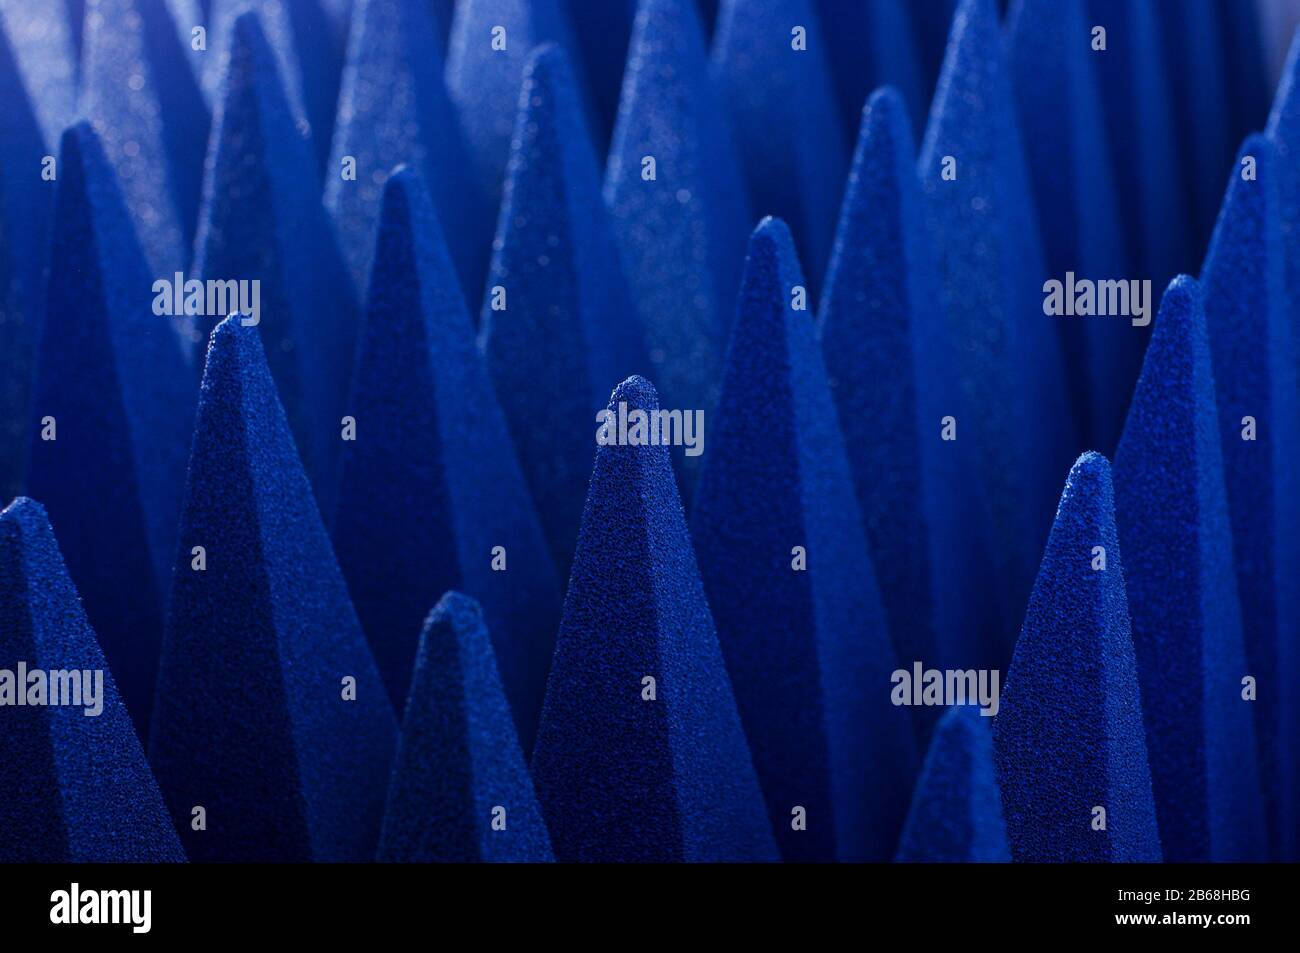 Blue soft hybrid pyramidal microwave and radio frequency absorbers close up Stock Photo